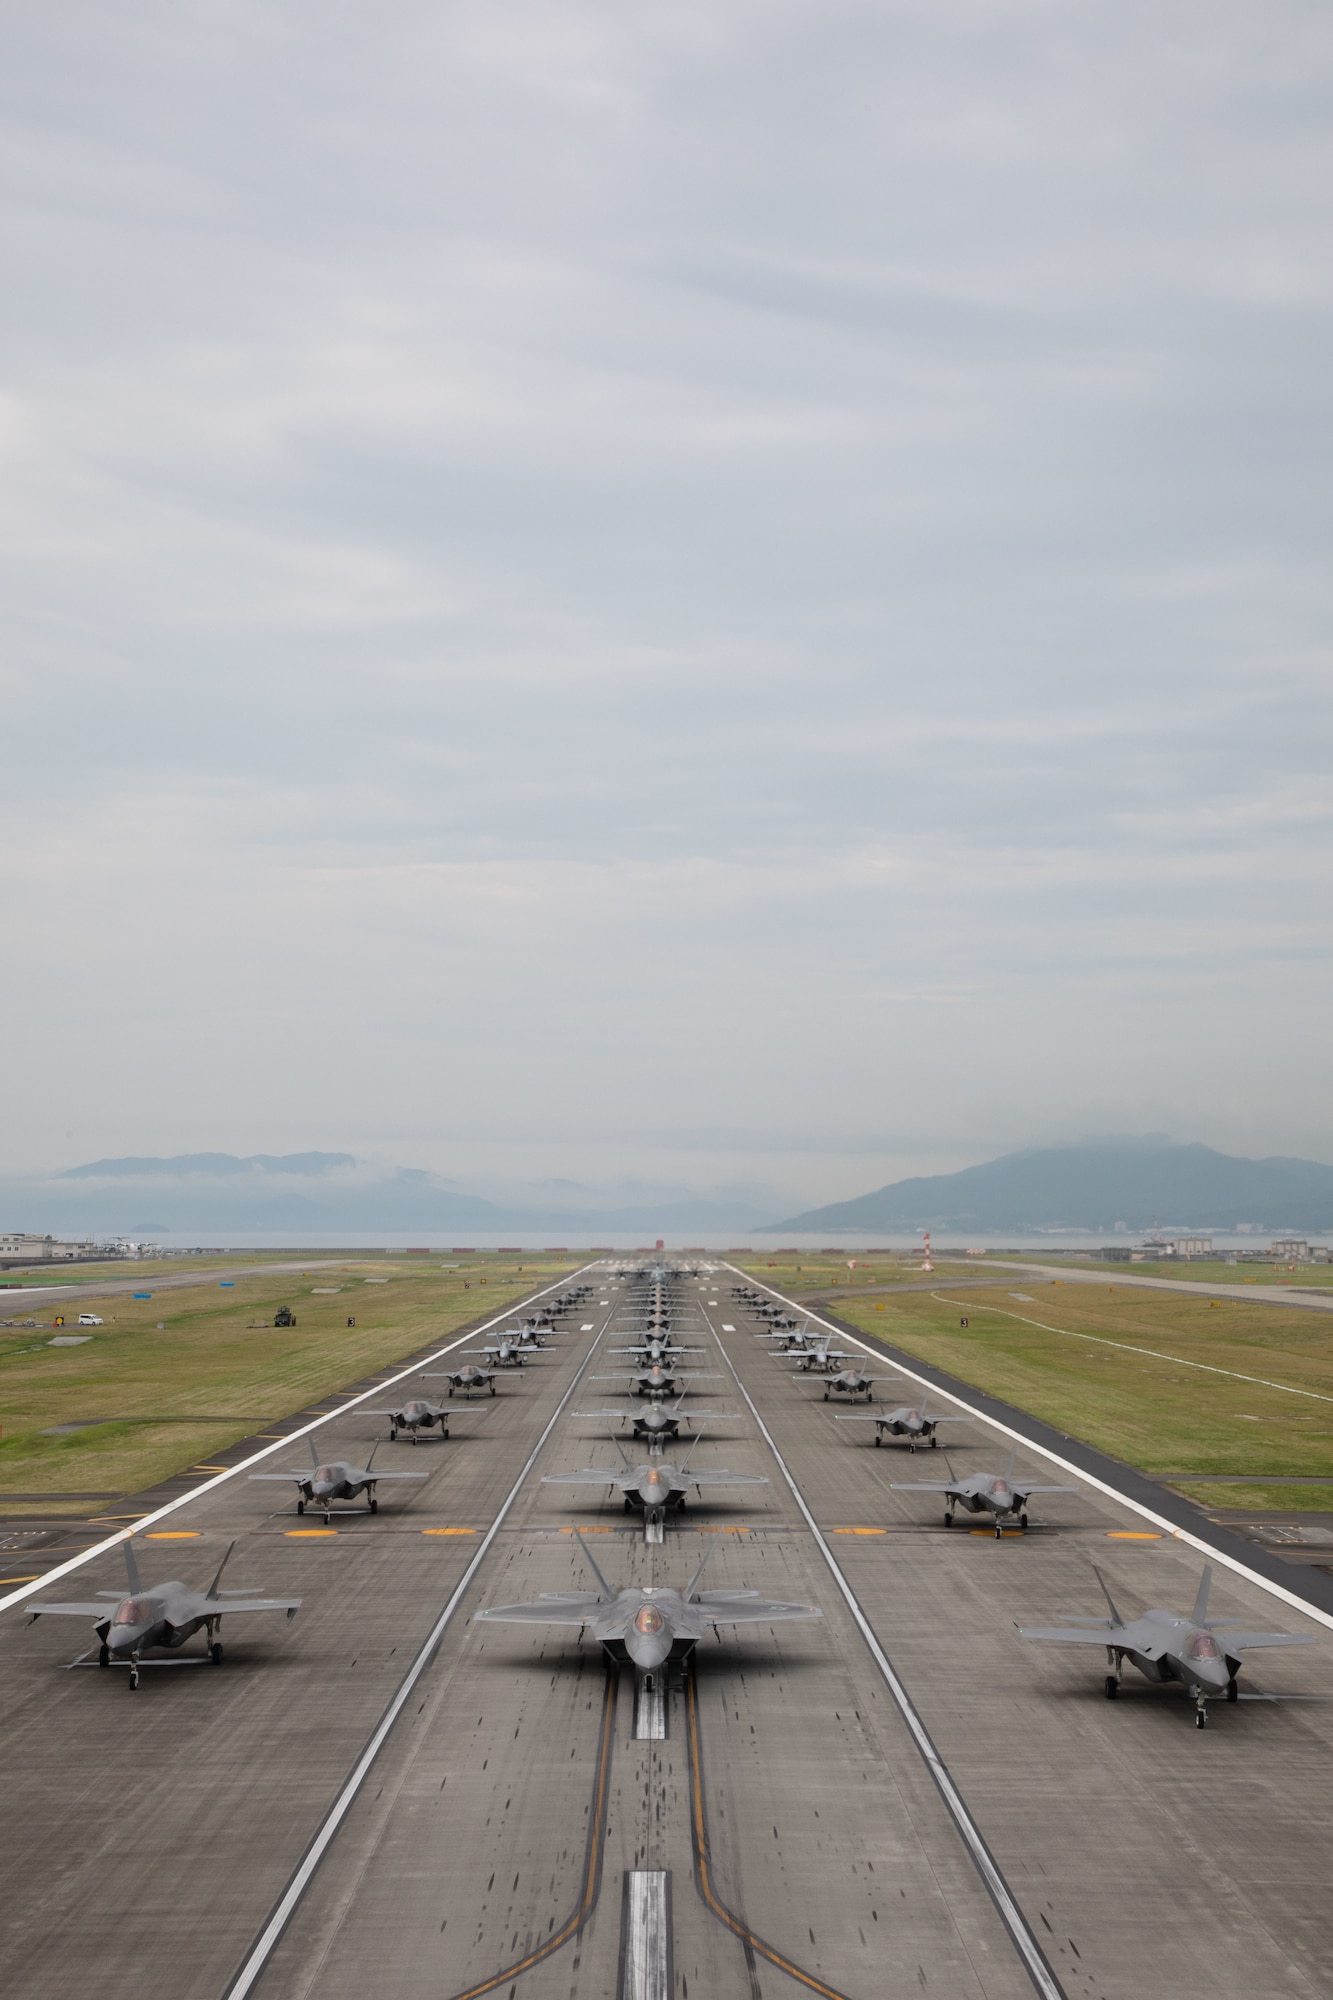 The U.S. Air force 354th Air Expeditionary Wing

and Marine Aircraft Group 12 performed a

capabilities demonstration during a pre-planned

readiness exercise at Marine Corps Air Station

Iwakuni, Japan, July 7, 2022